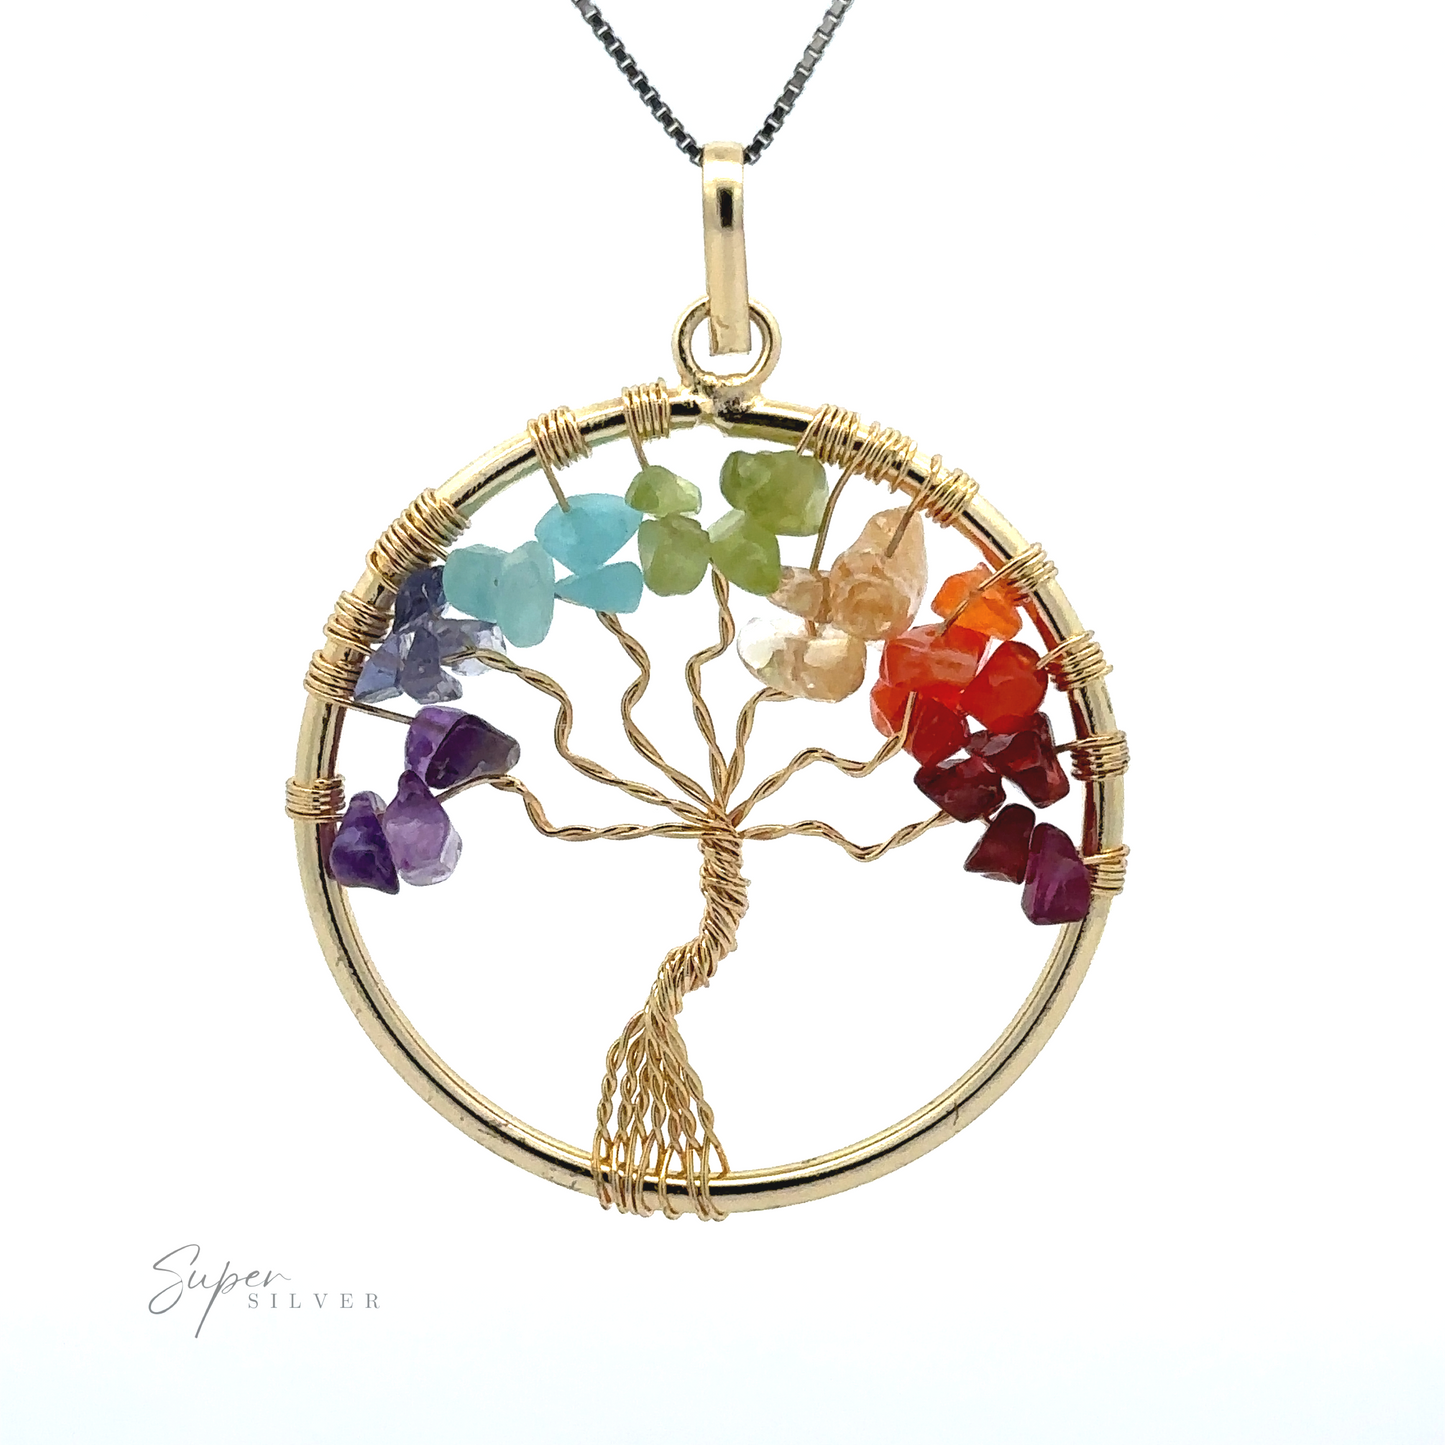 
                  
                    A Wire-Wrapped Chakra Tree of Life Pendant featuring a wire-wrapped tree design with colorful chakra stones representing leaves, all arranged in a circular metal frame. The chain and wire are metallic, and the gemstones form a gradient from green to red.
                  
                